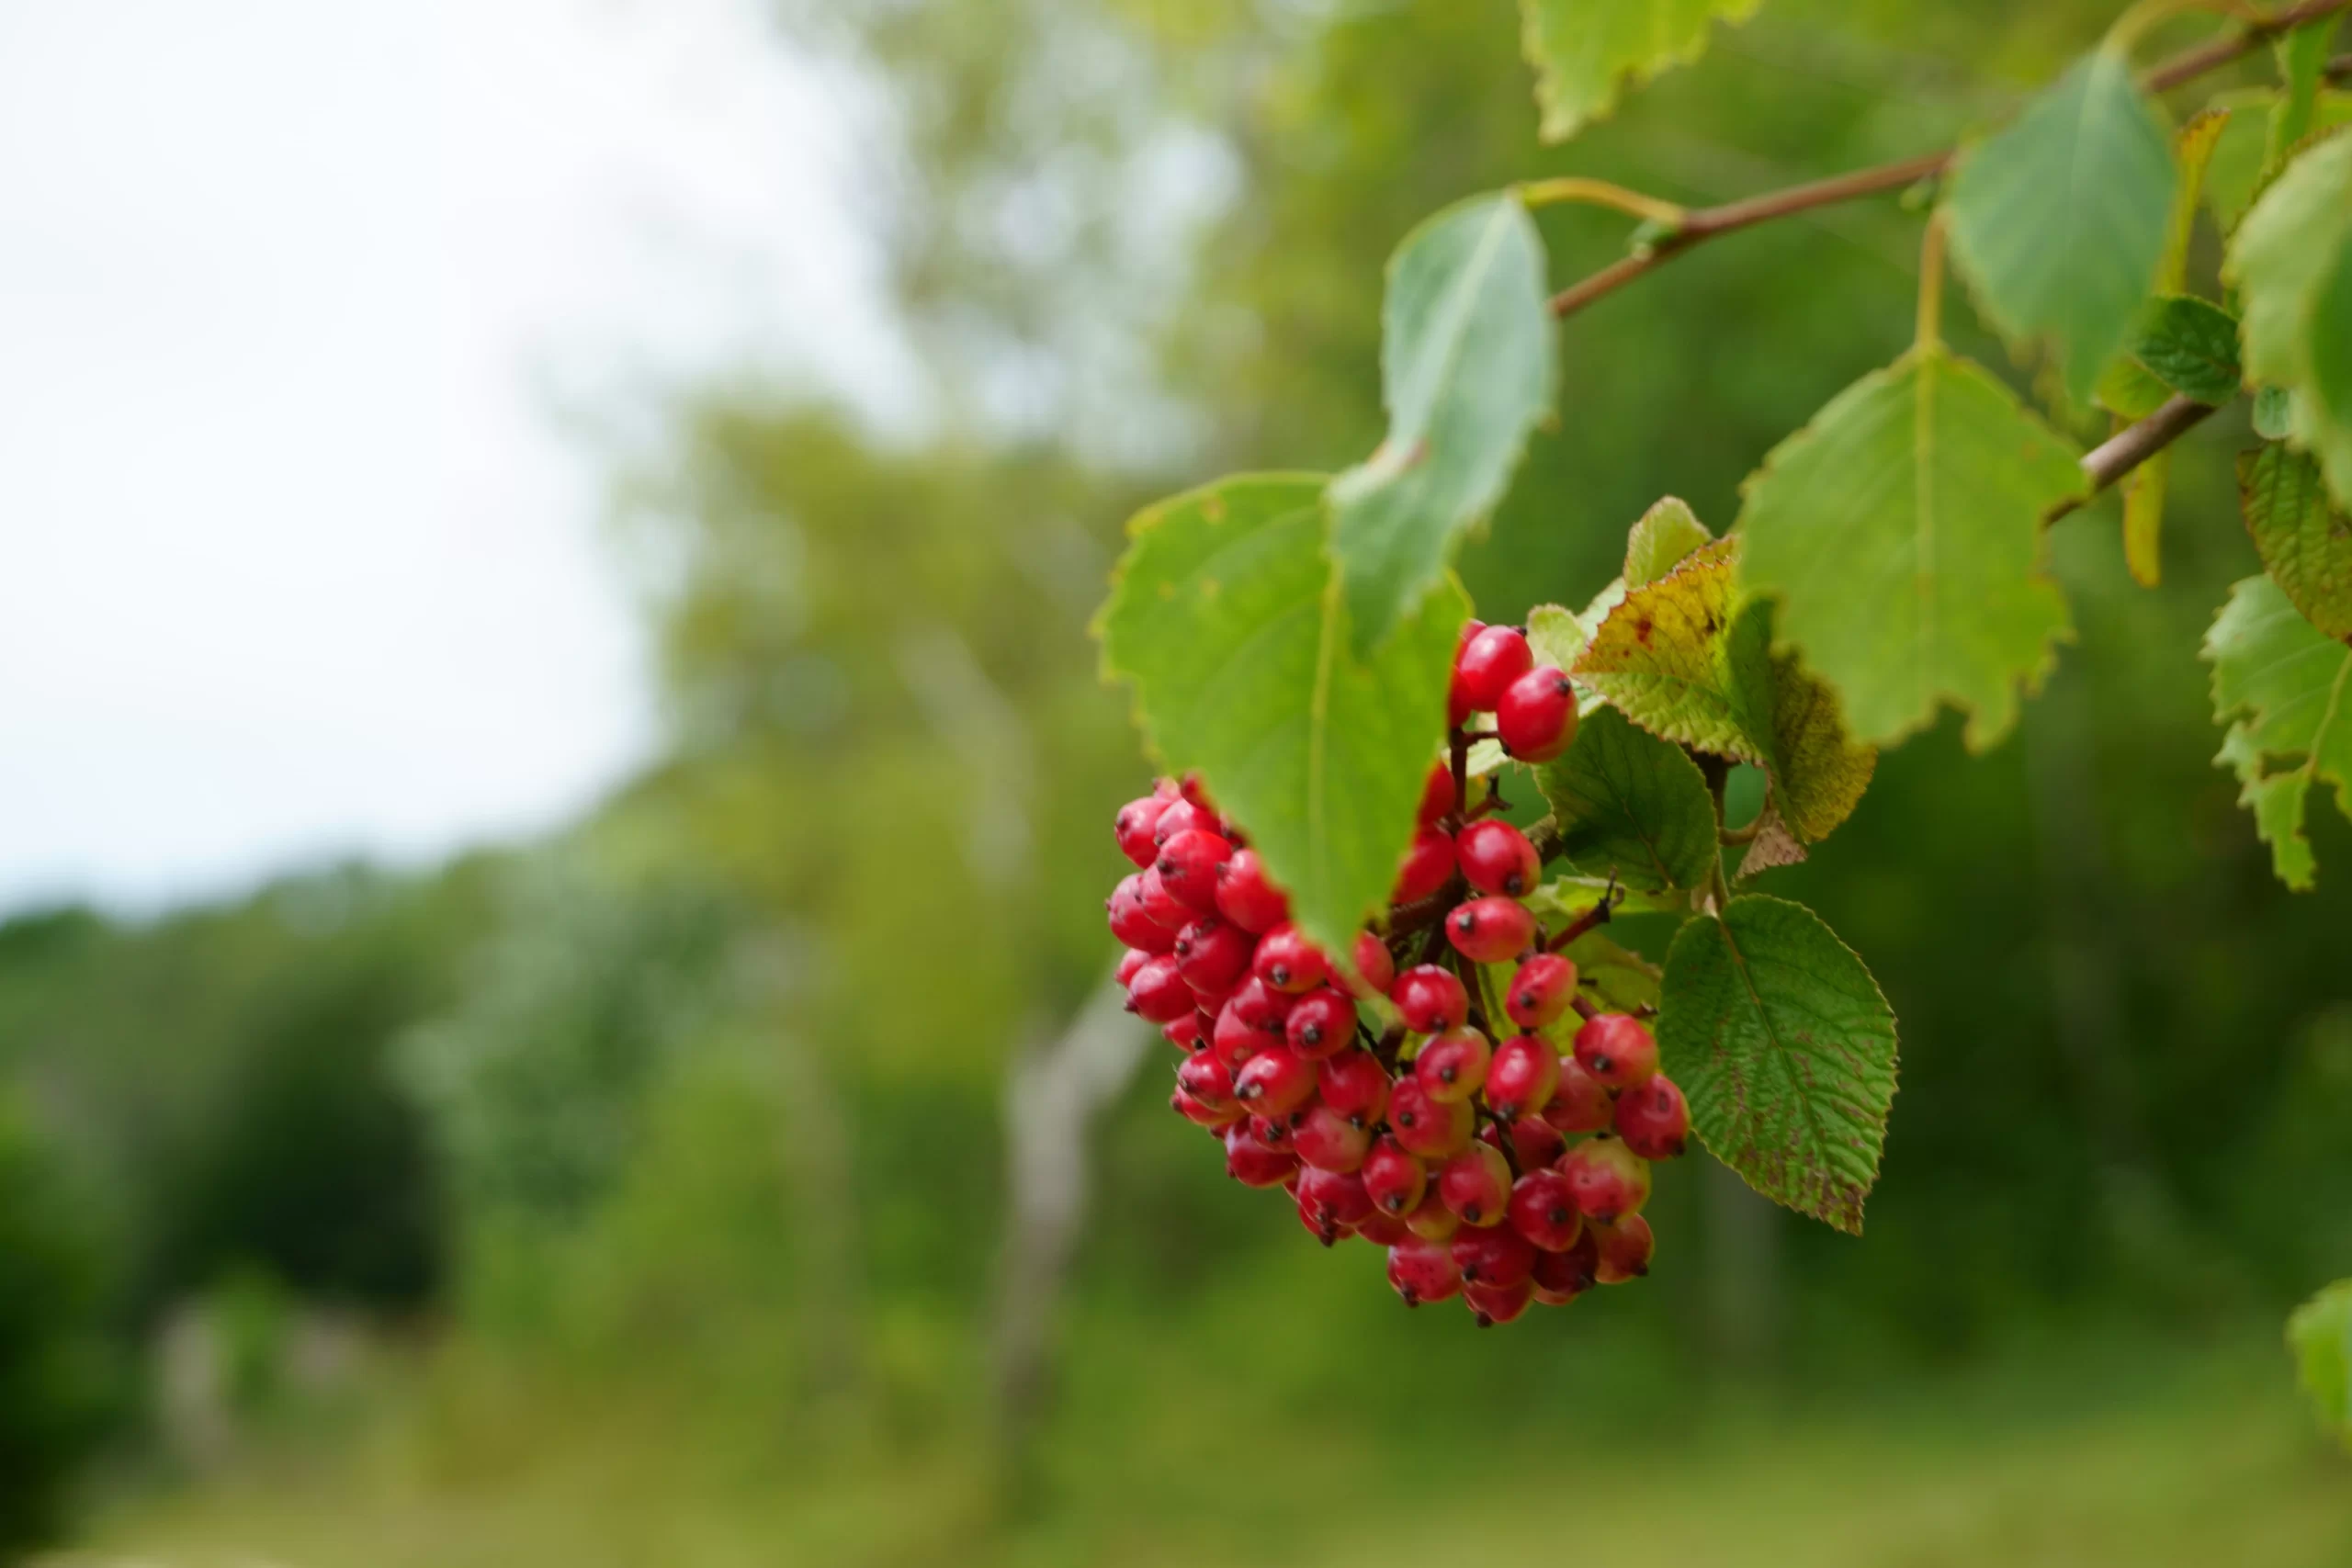 North Downs, Surrey, London, UK Published on August 14, 2019 SONY, ILCE-6000 Free to use under the Unsplash License The North Downs in Surrey, UK. Red berries.